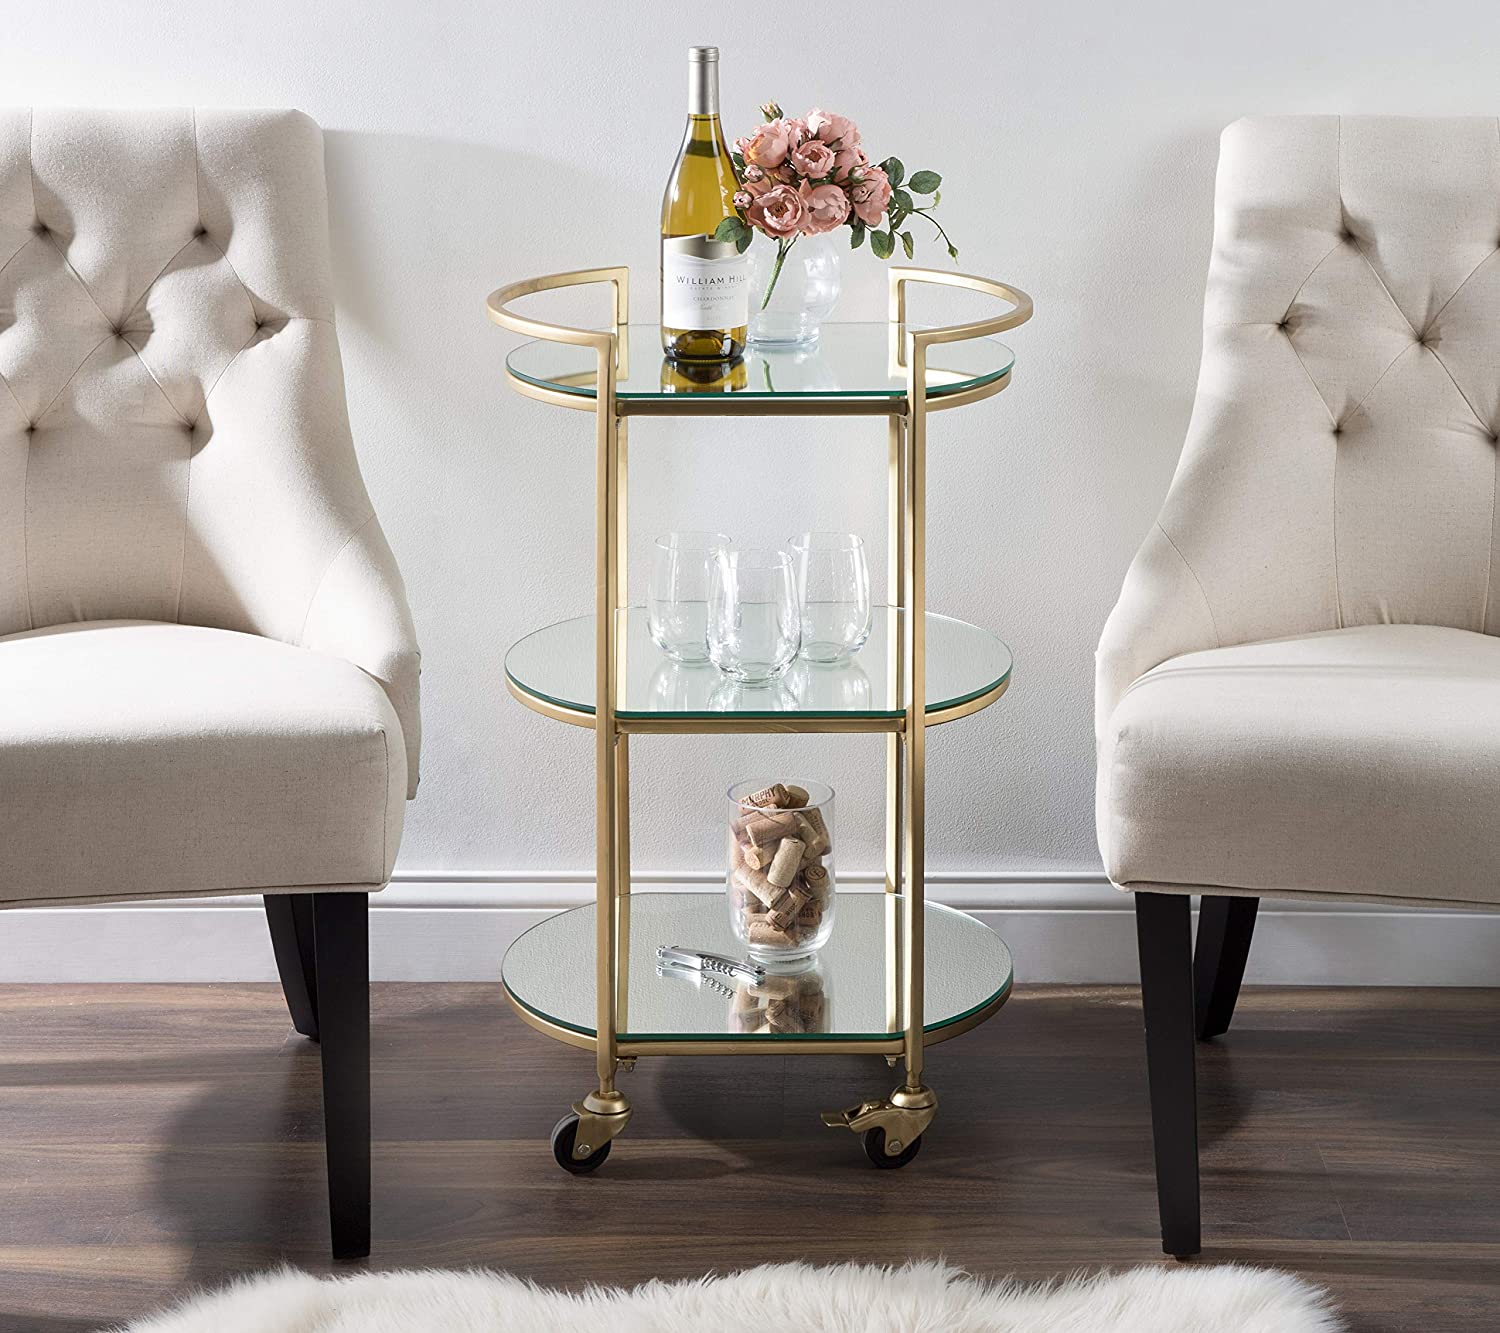 Kate and Laurel Vasseur Modern Bar Cart, 19 x 15 x 30, Gold, Glam 3-Tier Mirrored Glass Bar Cart for Serving, Storage, and Display